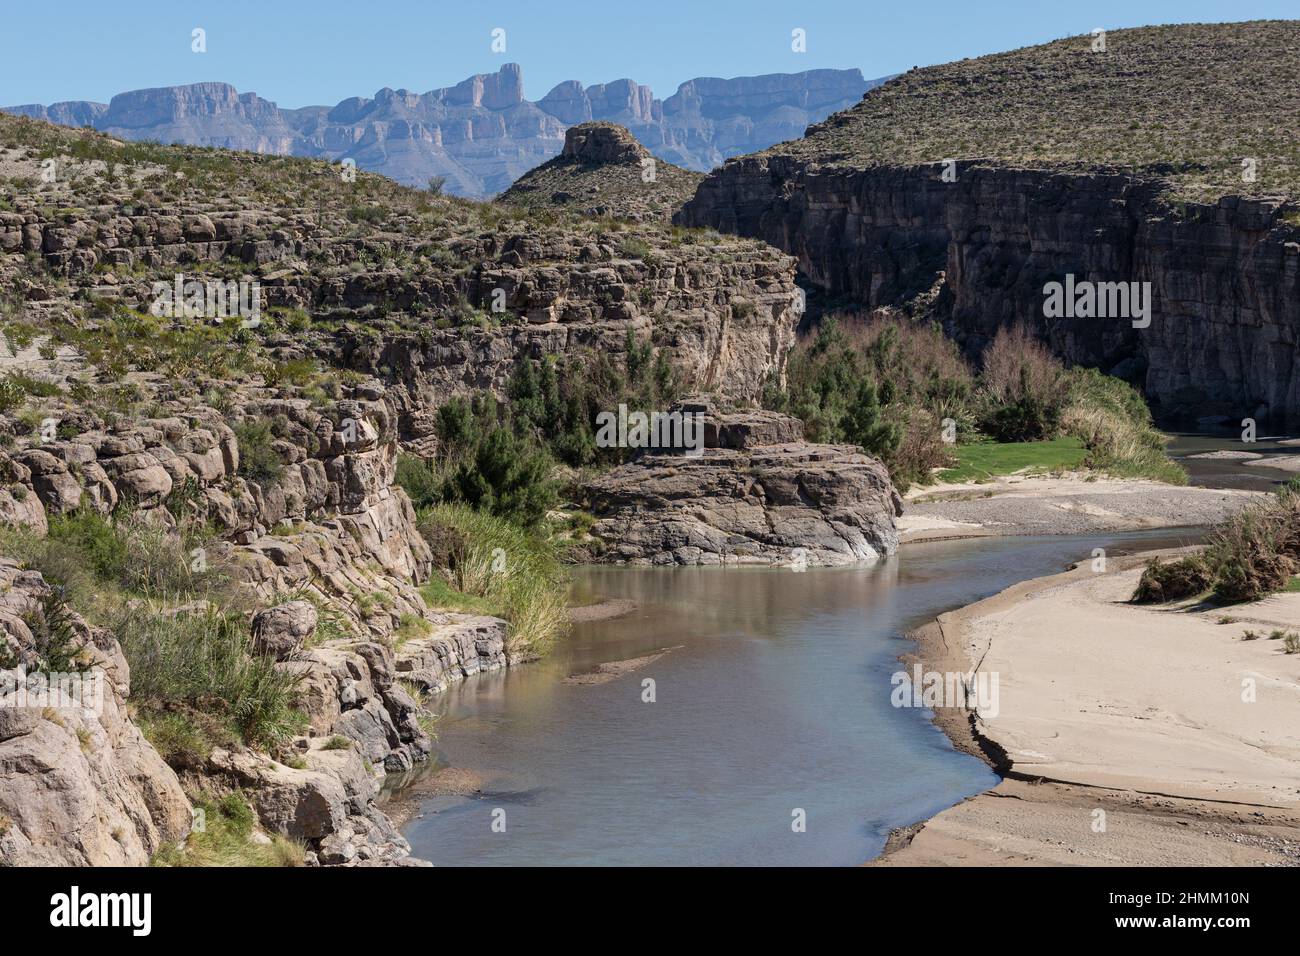 The Rio Grande meanders through the limestone walls of Hot Springs Canyon in Big Bend National Park. Stock Photo